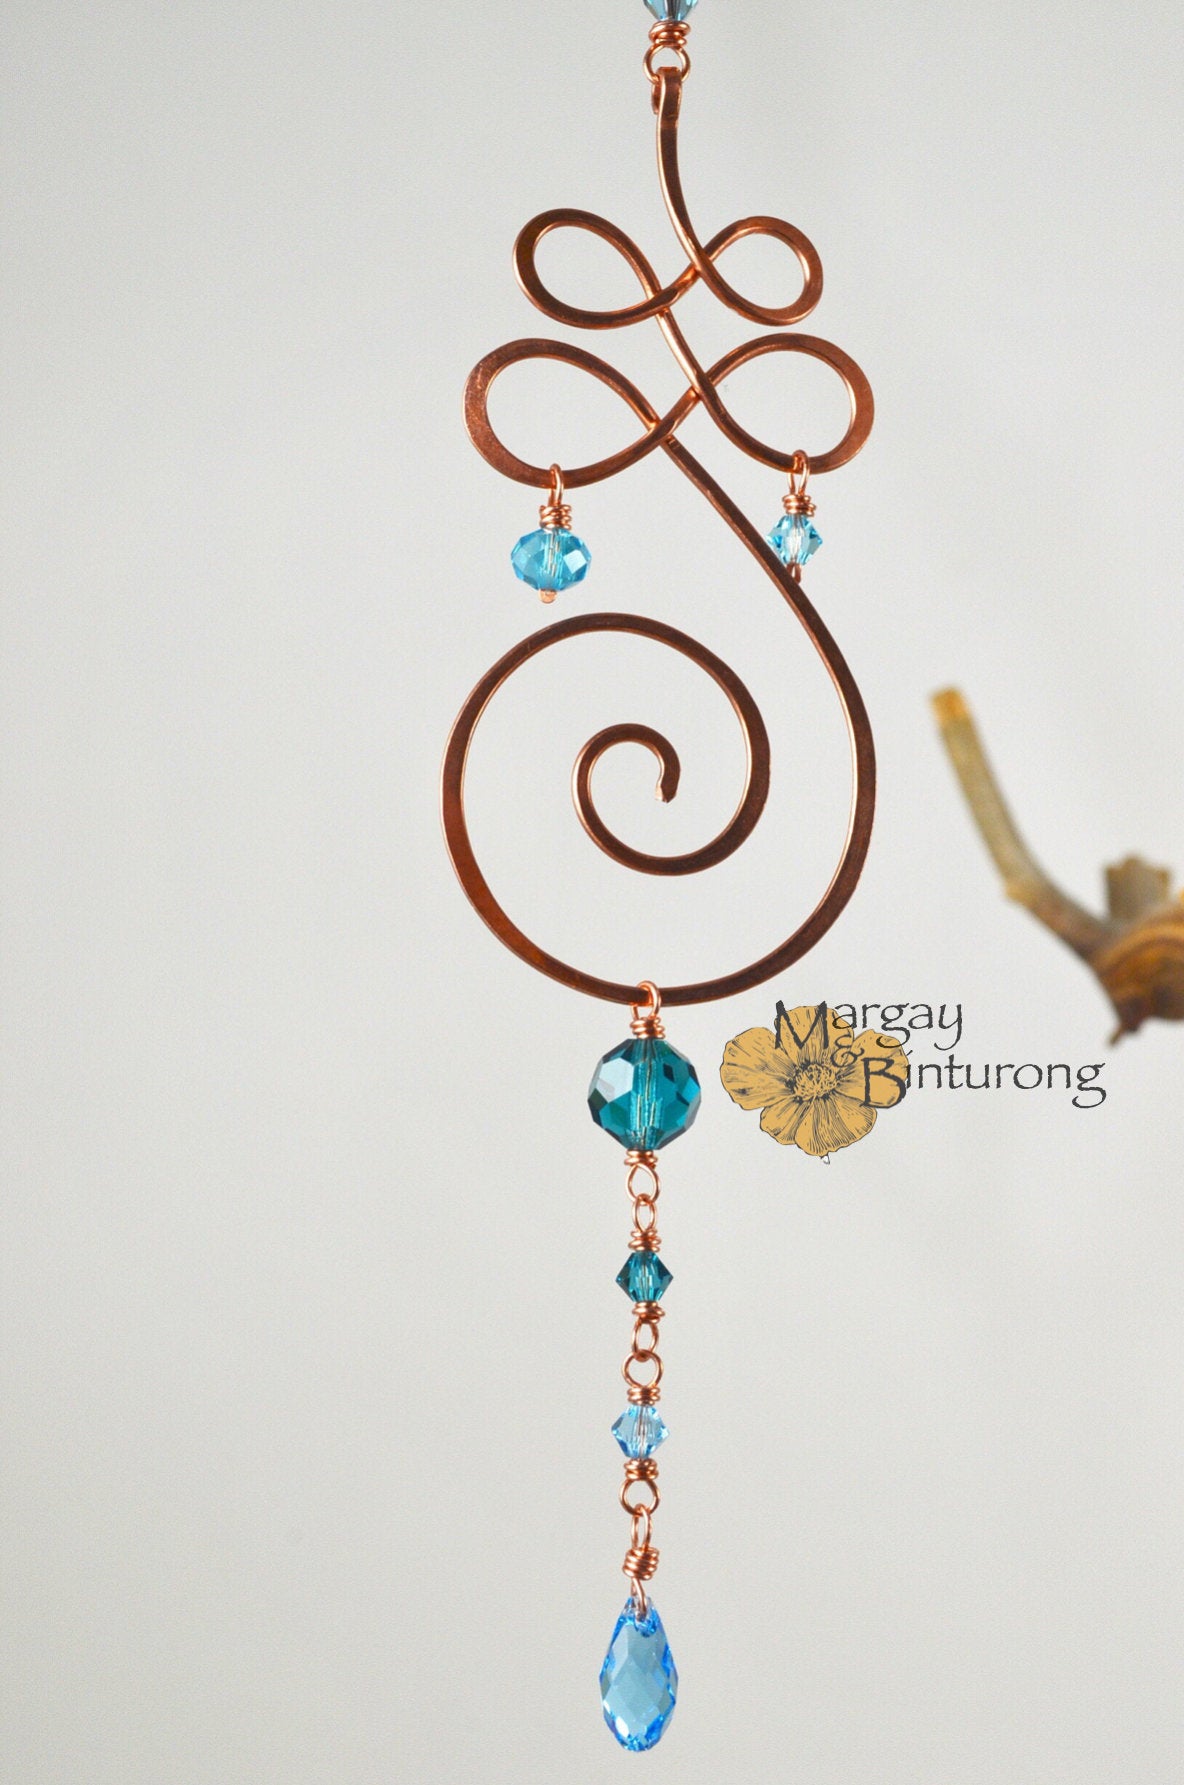 “Tranquility” Unalome ~ Mini Suncatcher Made with Crystal prism beads